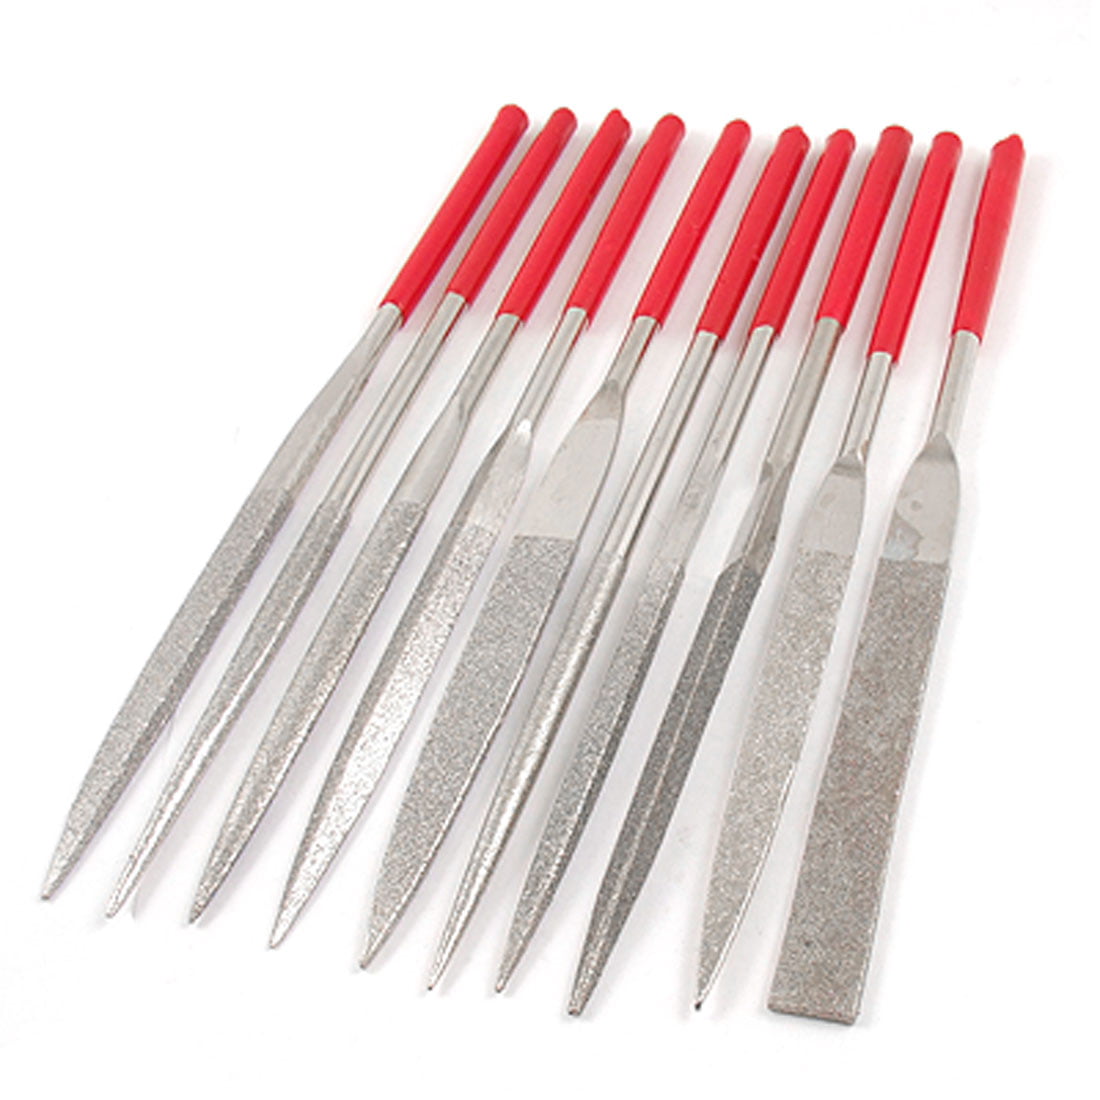 Assorted Needle Files Hobby Craft Watchmakers Jewelers Metal Filing Tools 10Pcs 